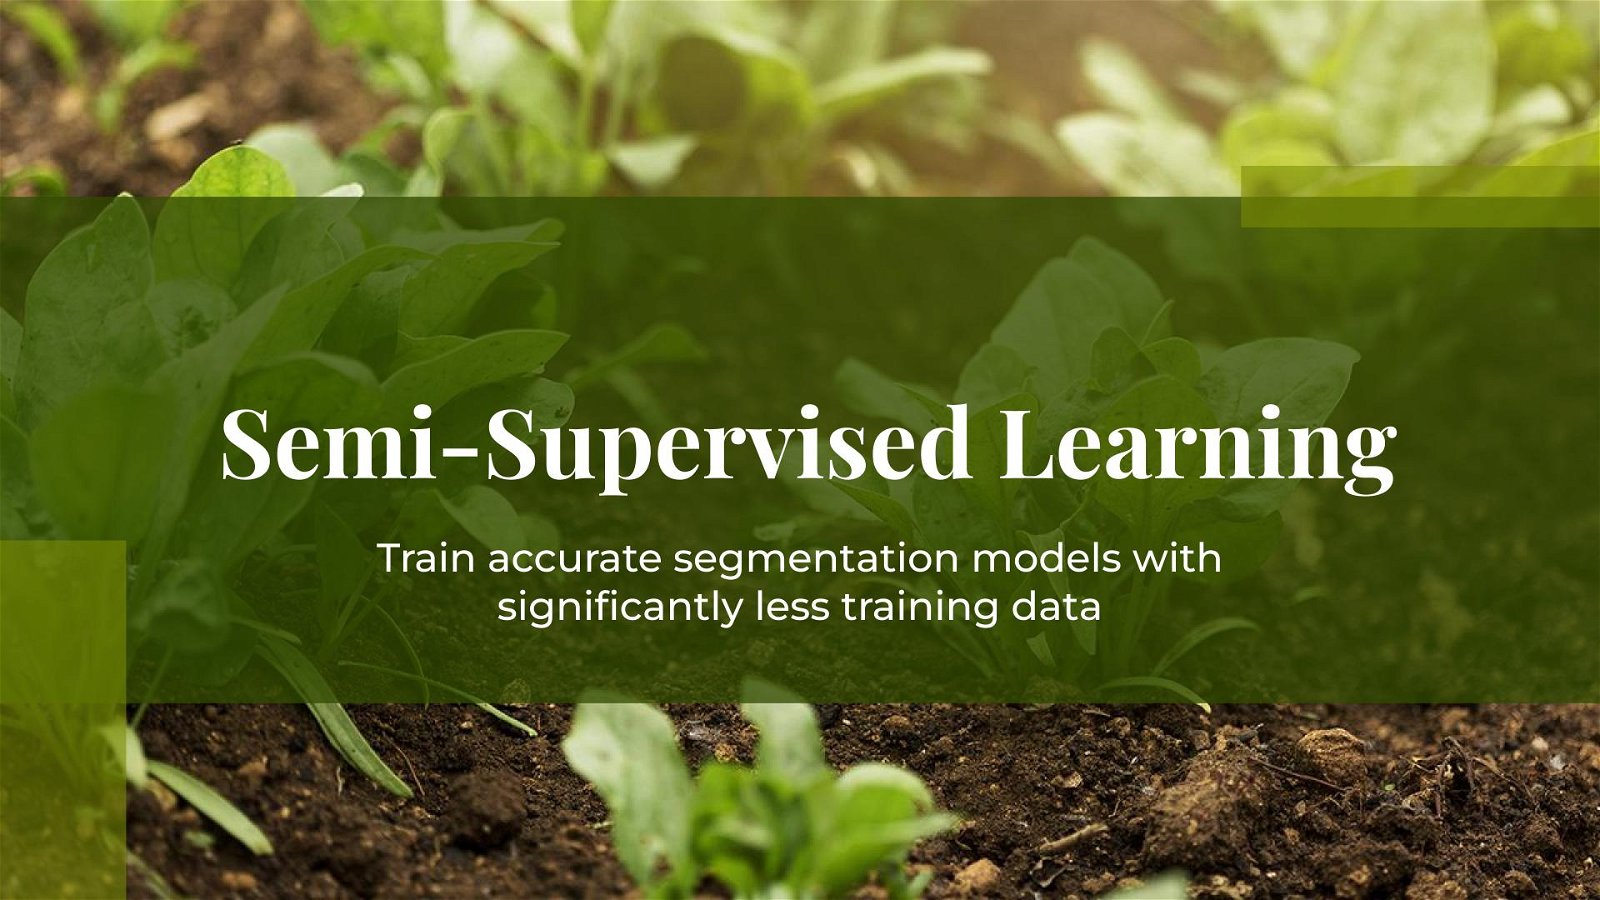 How to Train a Model with Only 62 Labeled Images using Semi-Supervised Learning